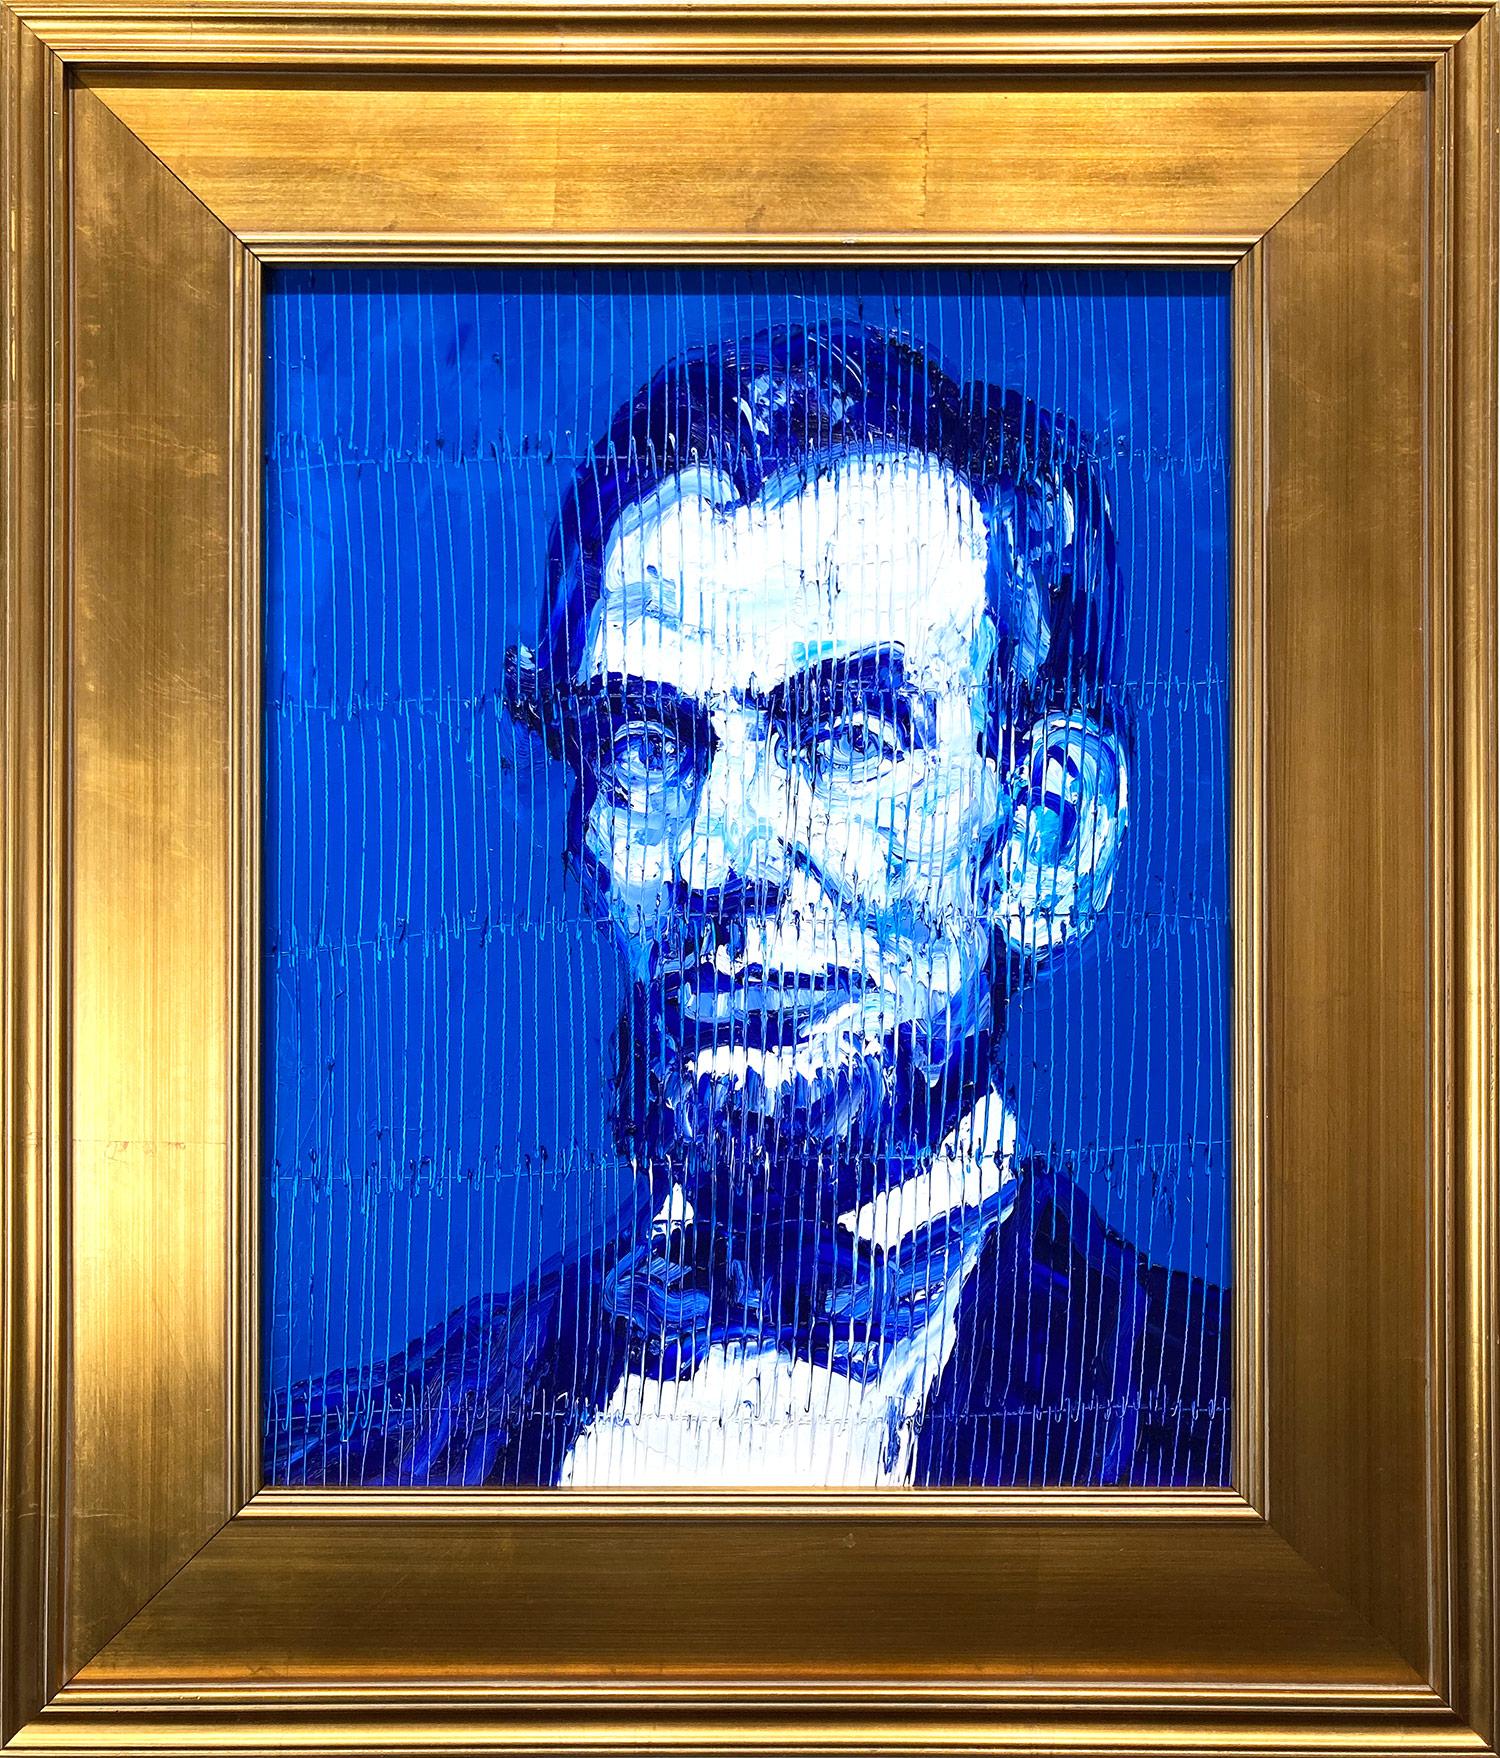 Hunt Slonem Portrait Painting - "Blue Lincoln" Neo-Expressionist Oil Painting in Blue Background on Wood